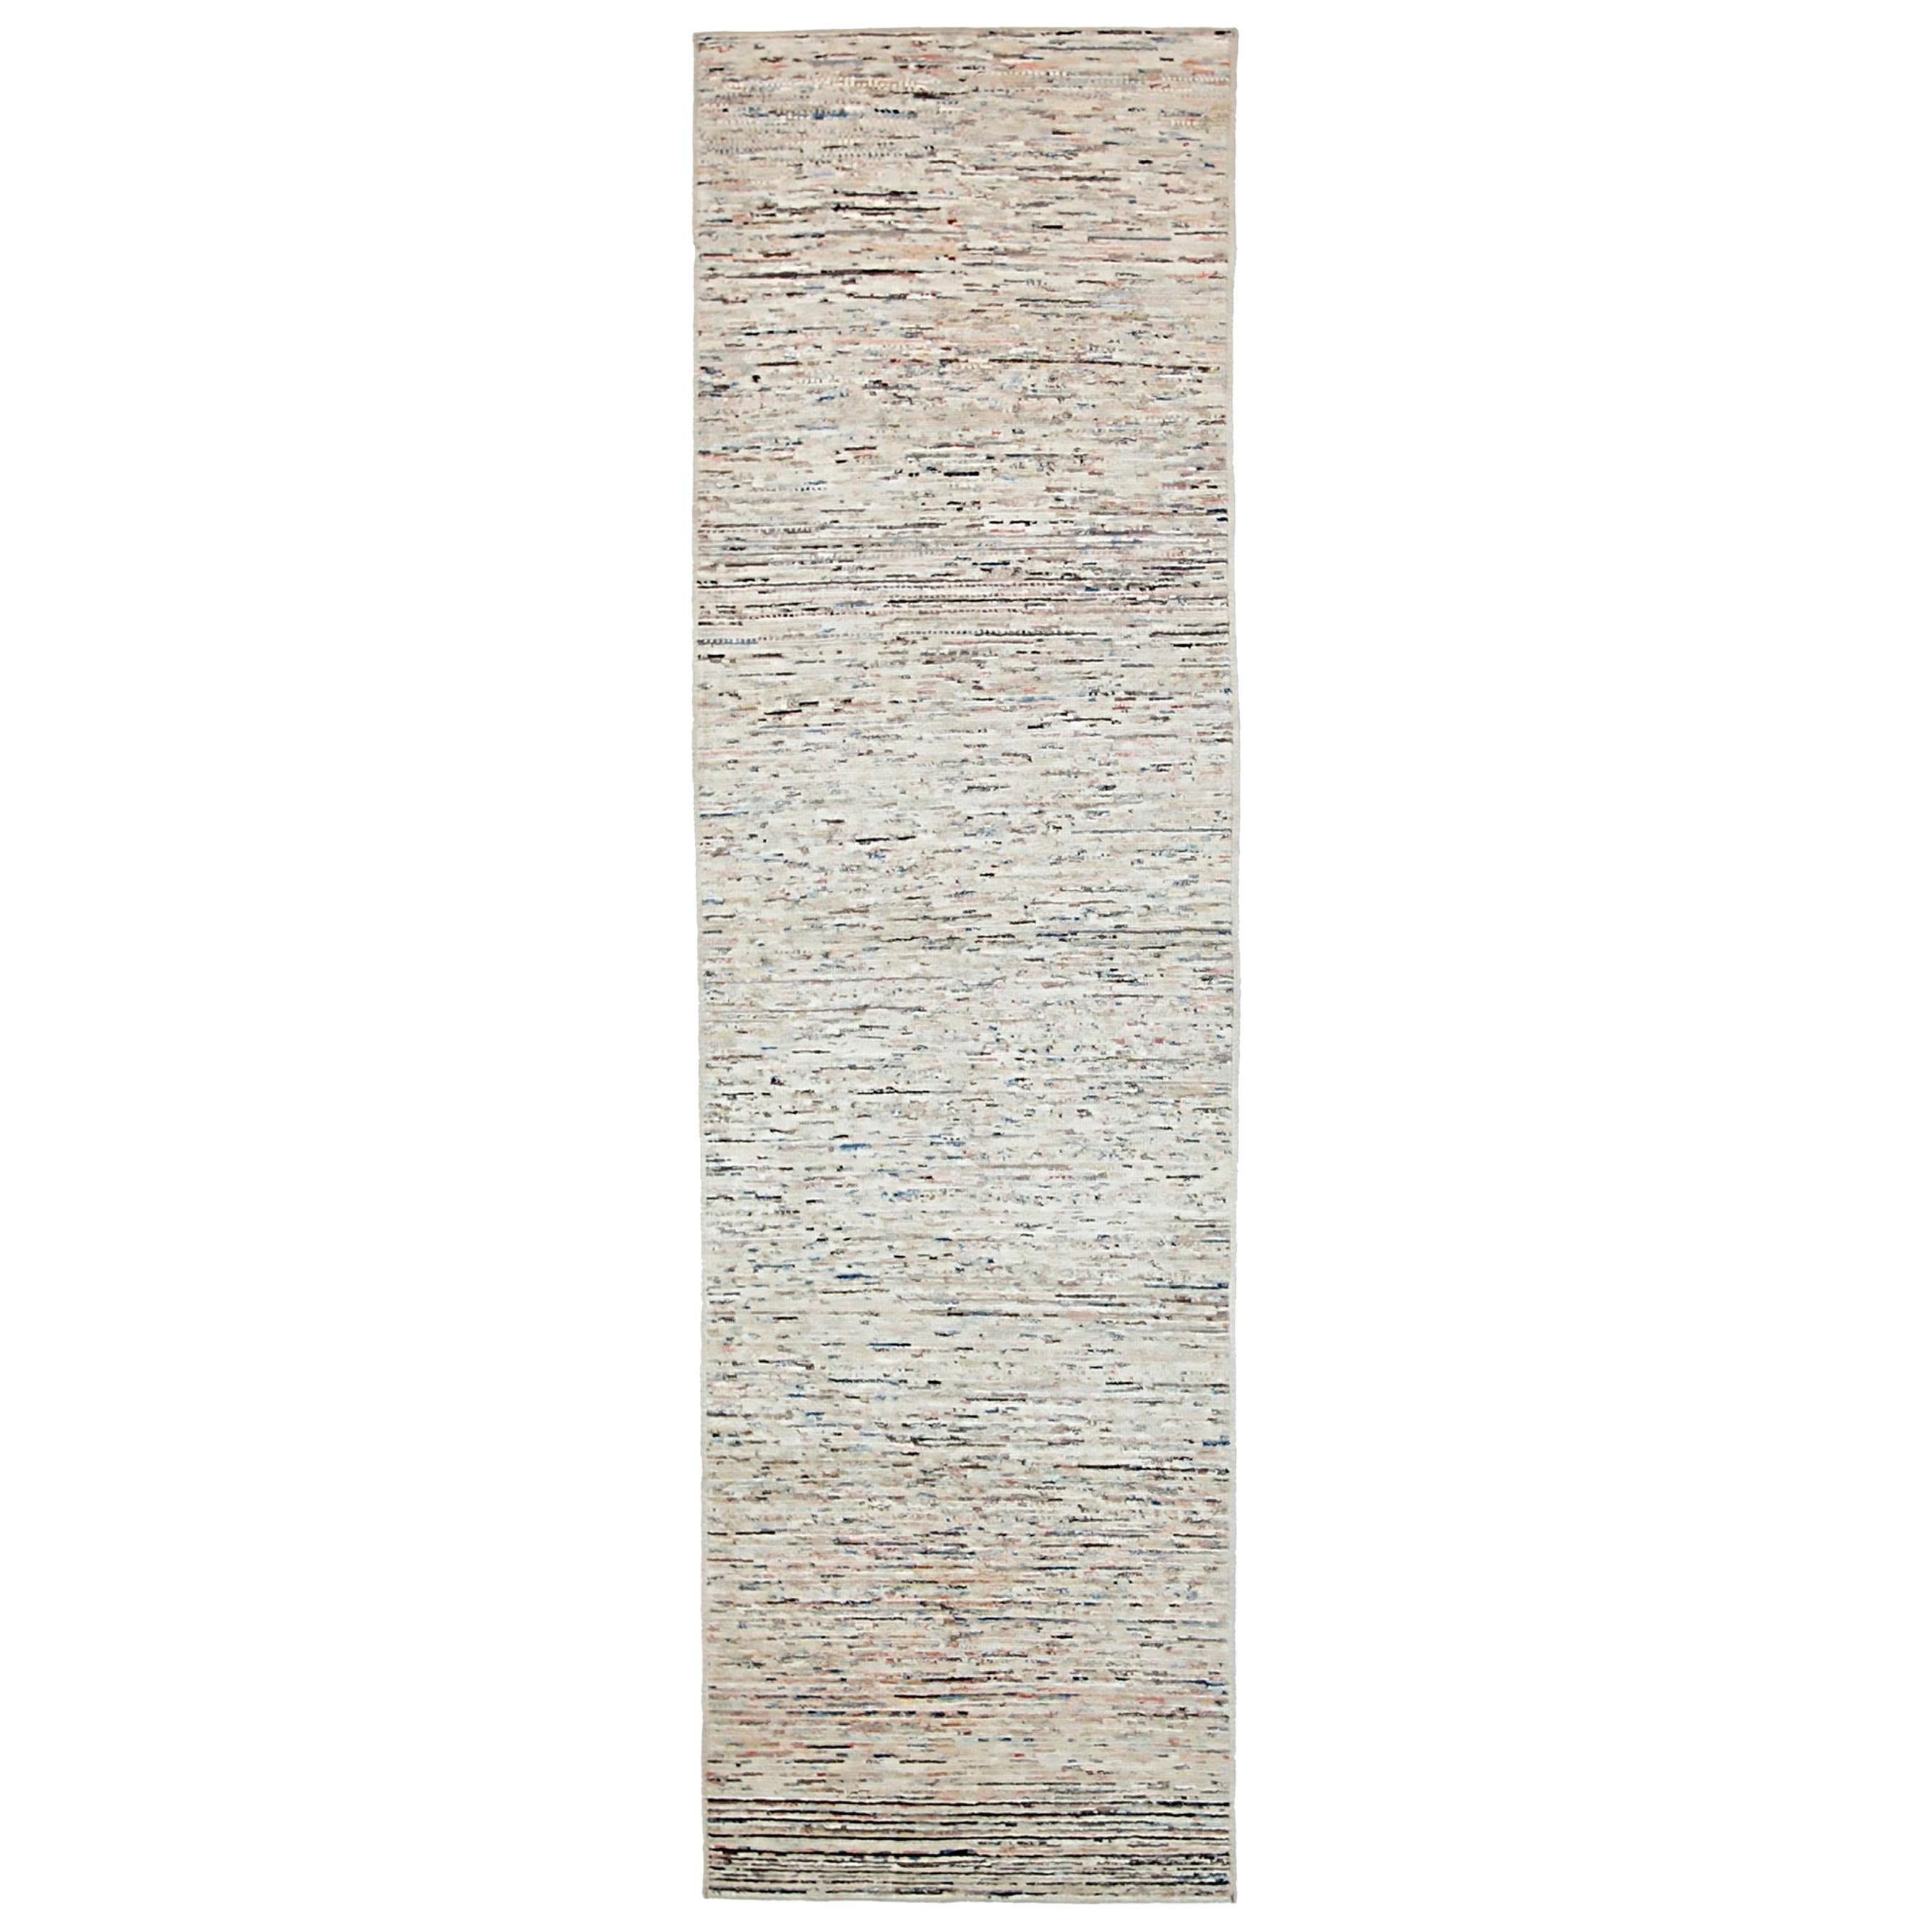 Nazmiyal Collection Cream Modern Moroccan Style Runner Rug 2 ft 8 in x 9 ft 8 in